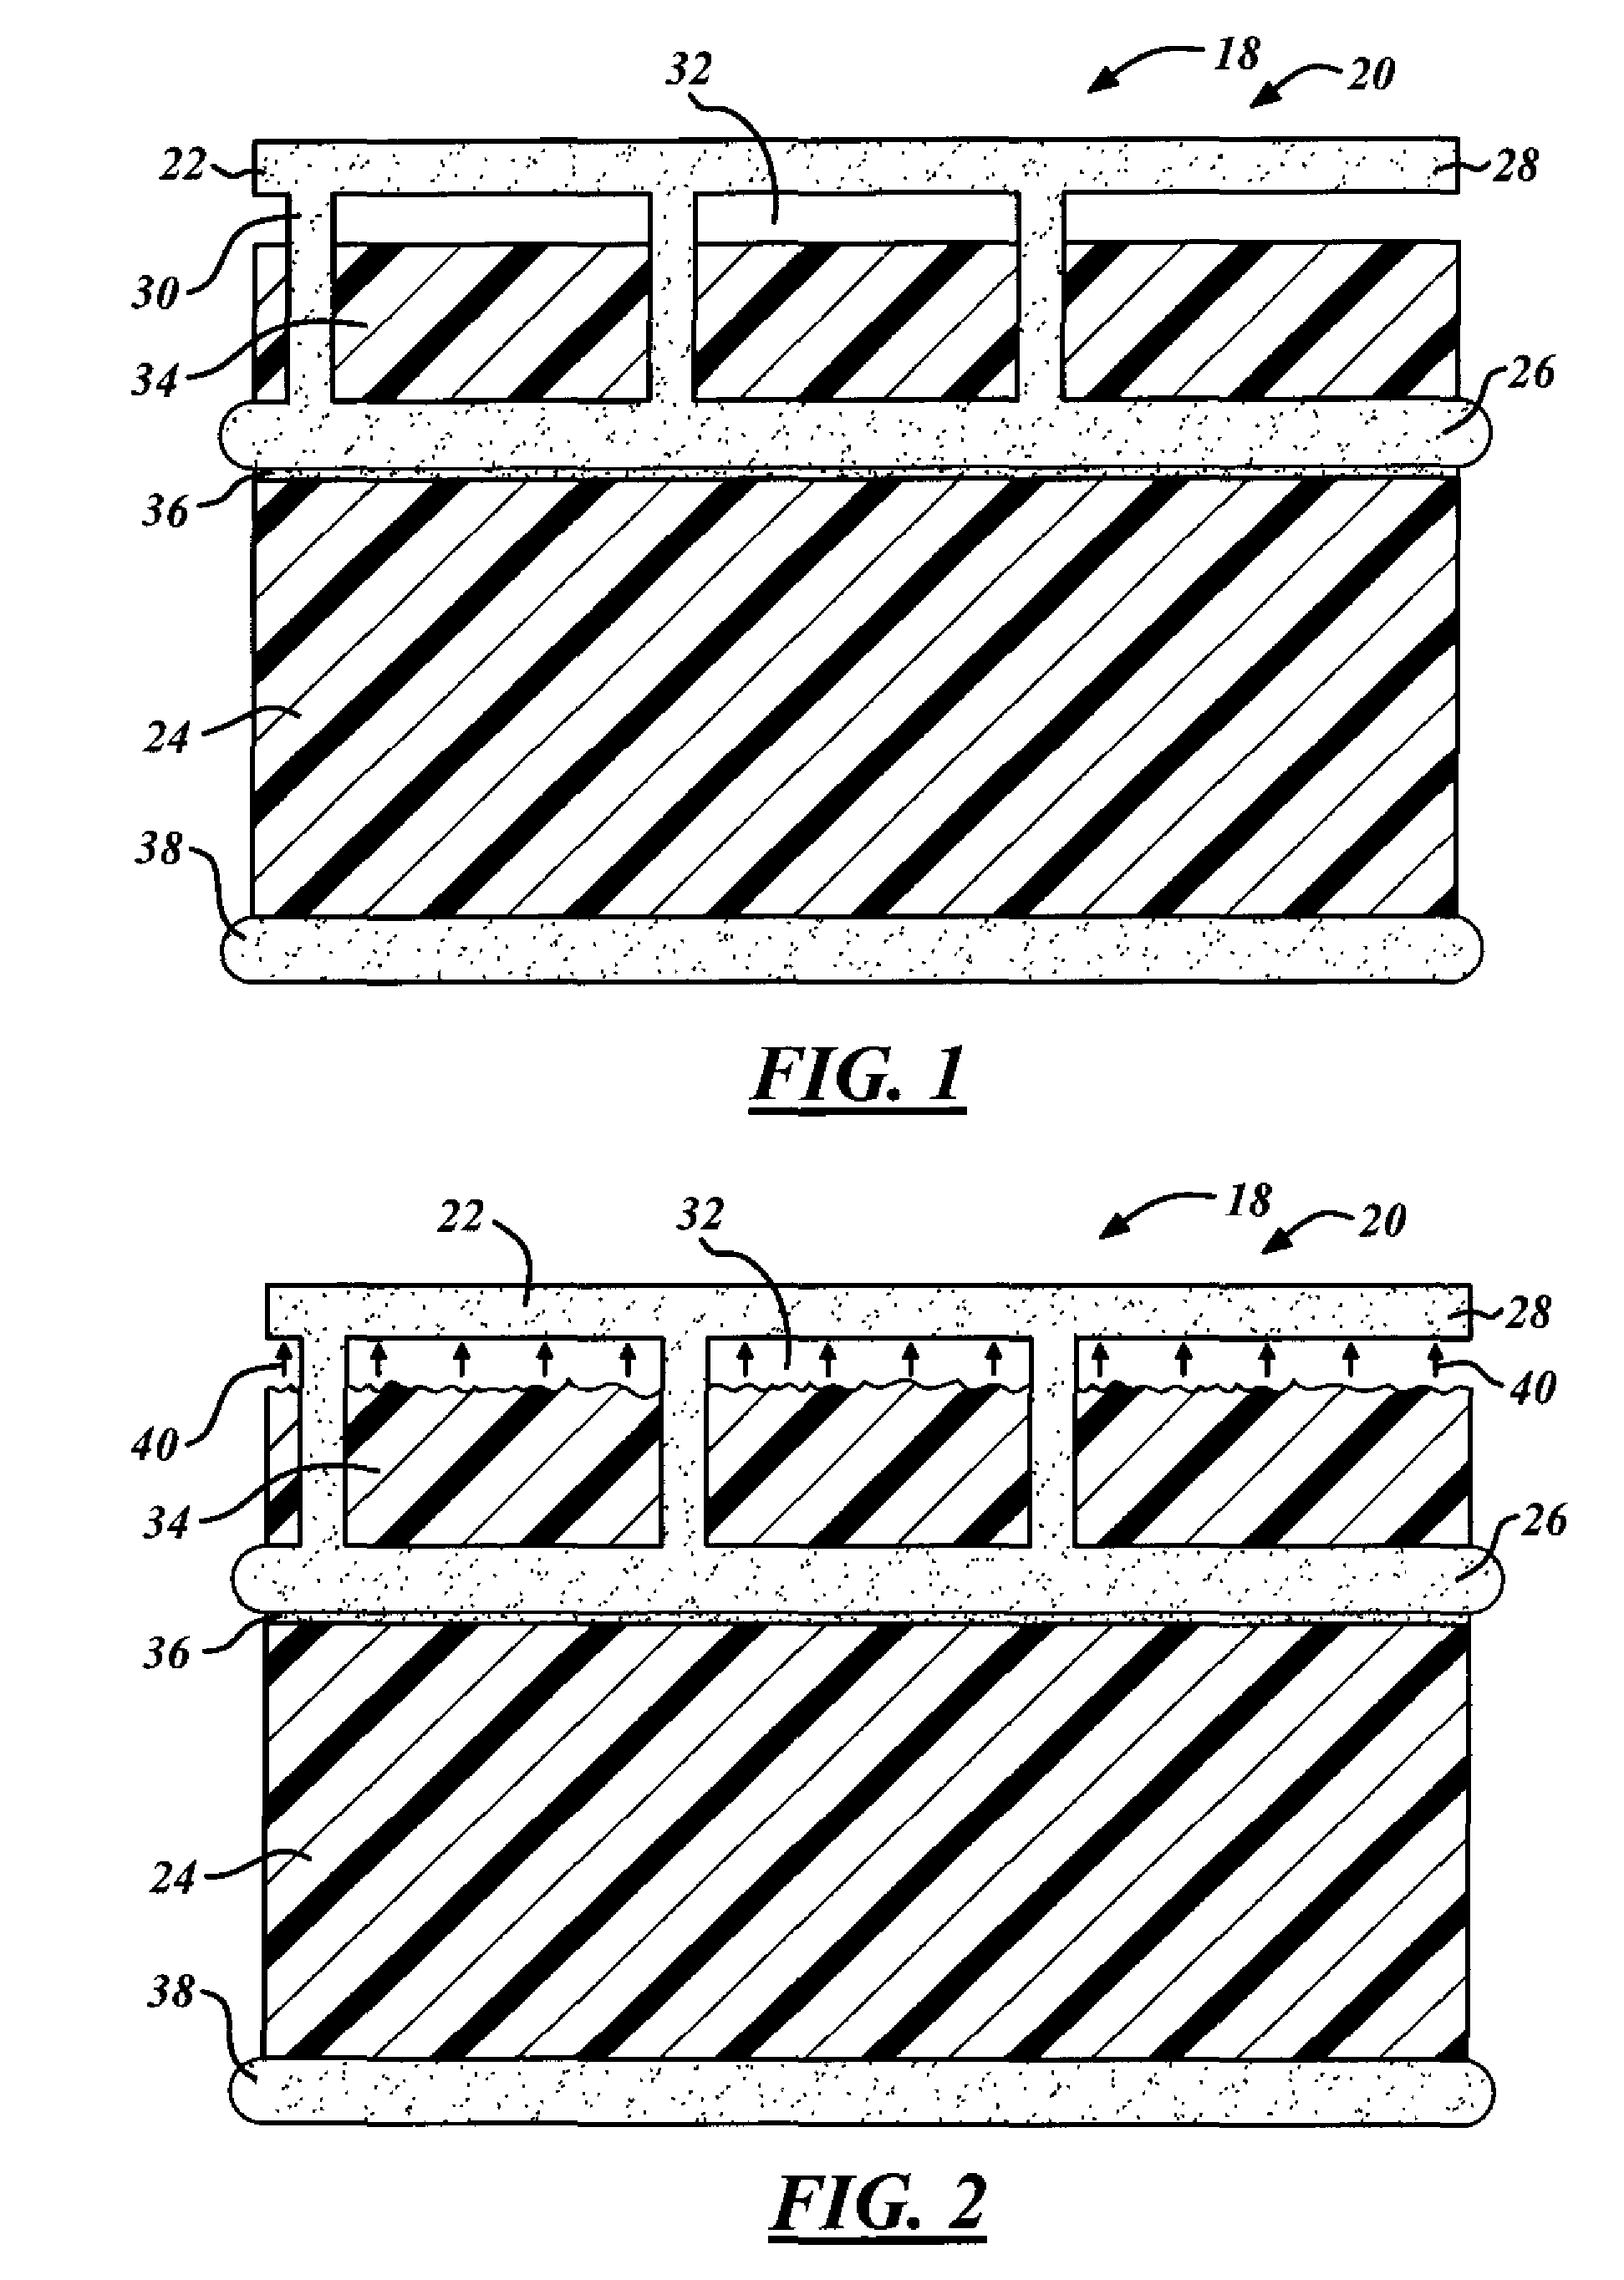 Materials for self-transpiring hot skins for hypersonic vehicles or reusable space vehicles